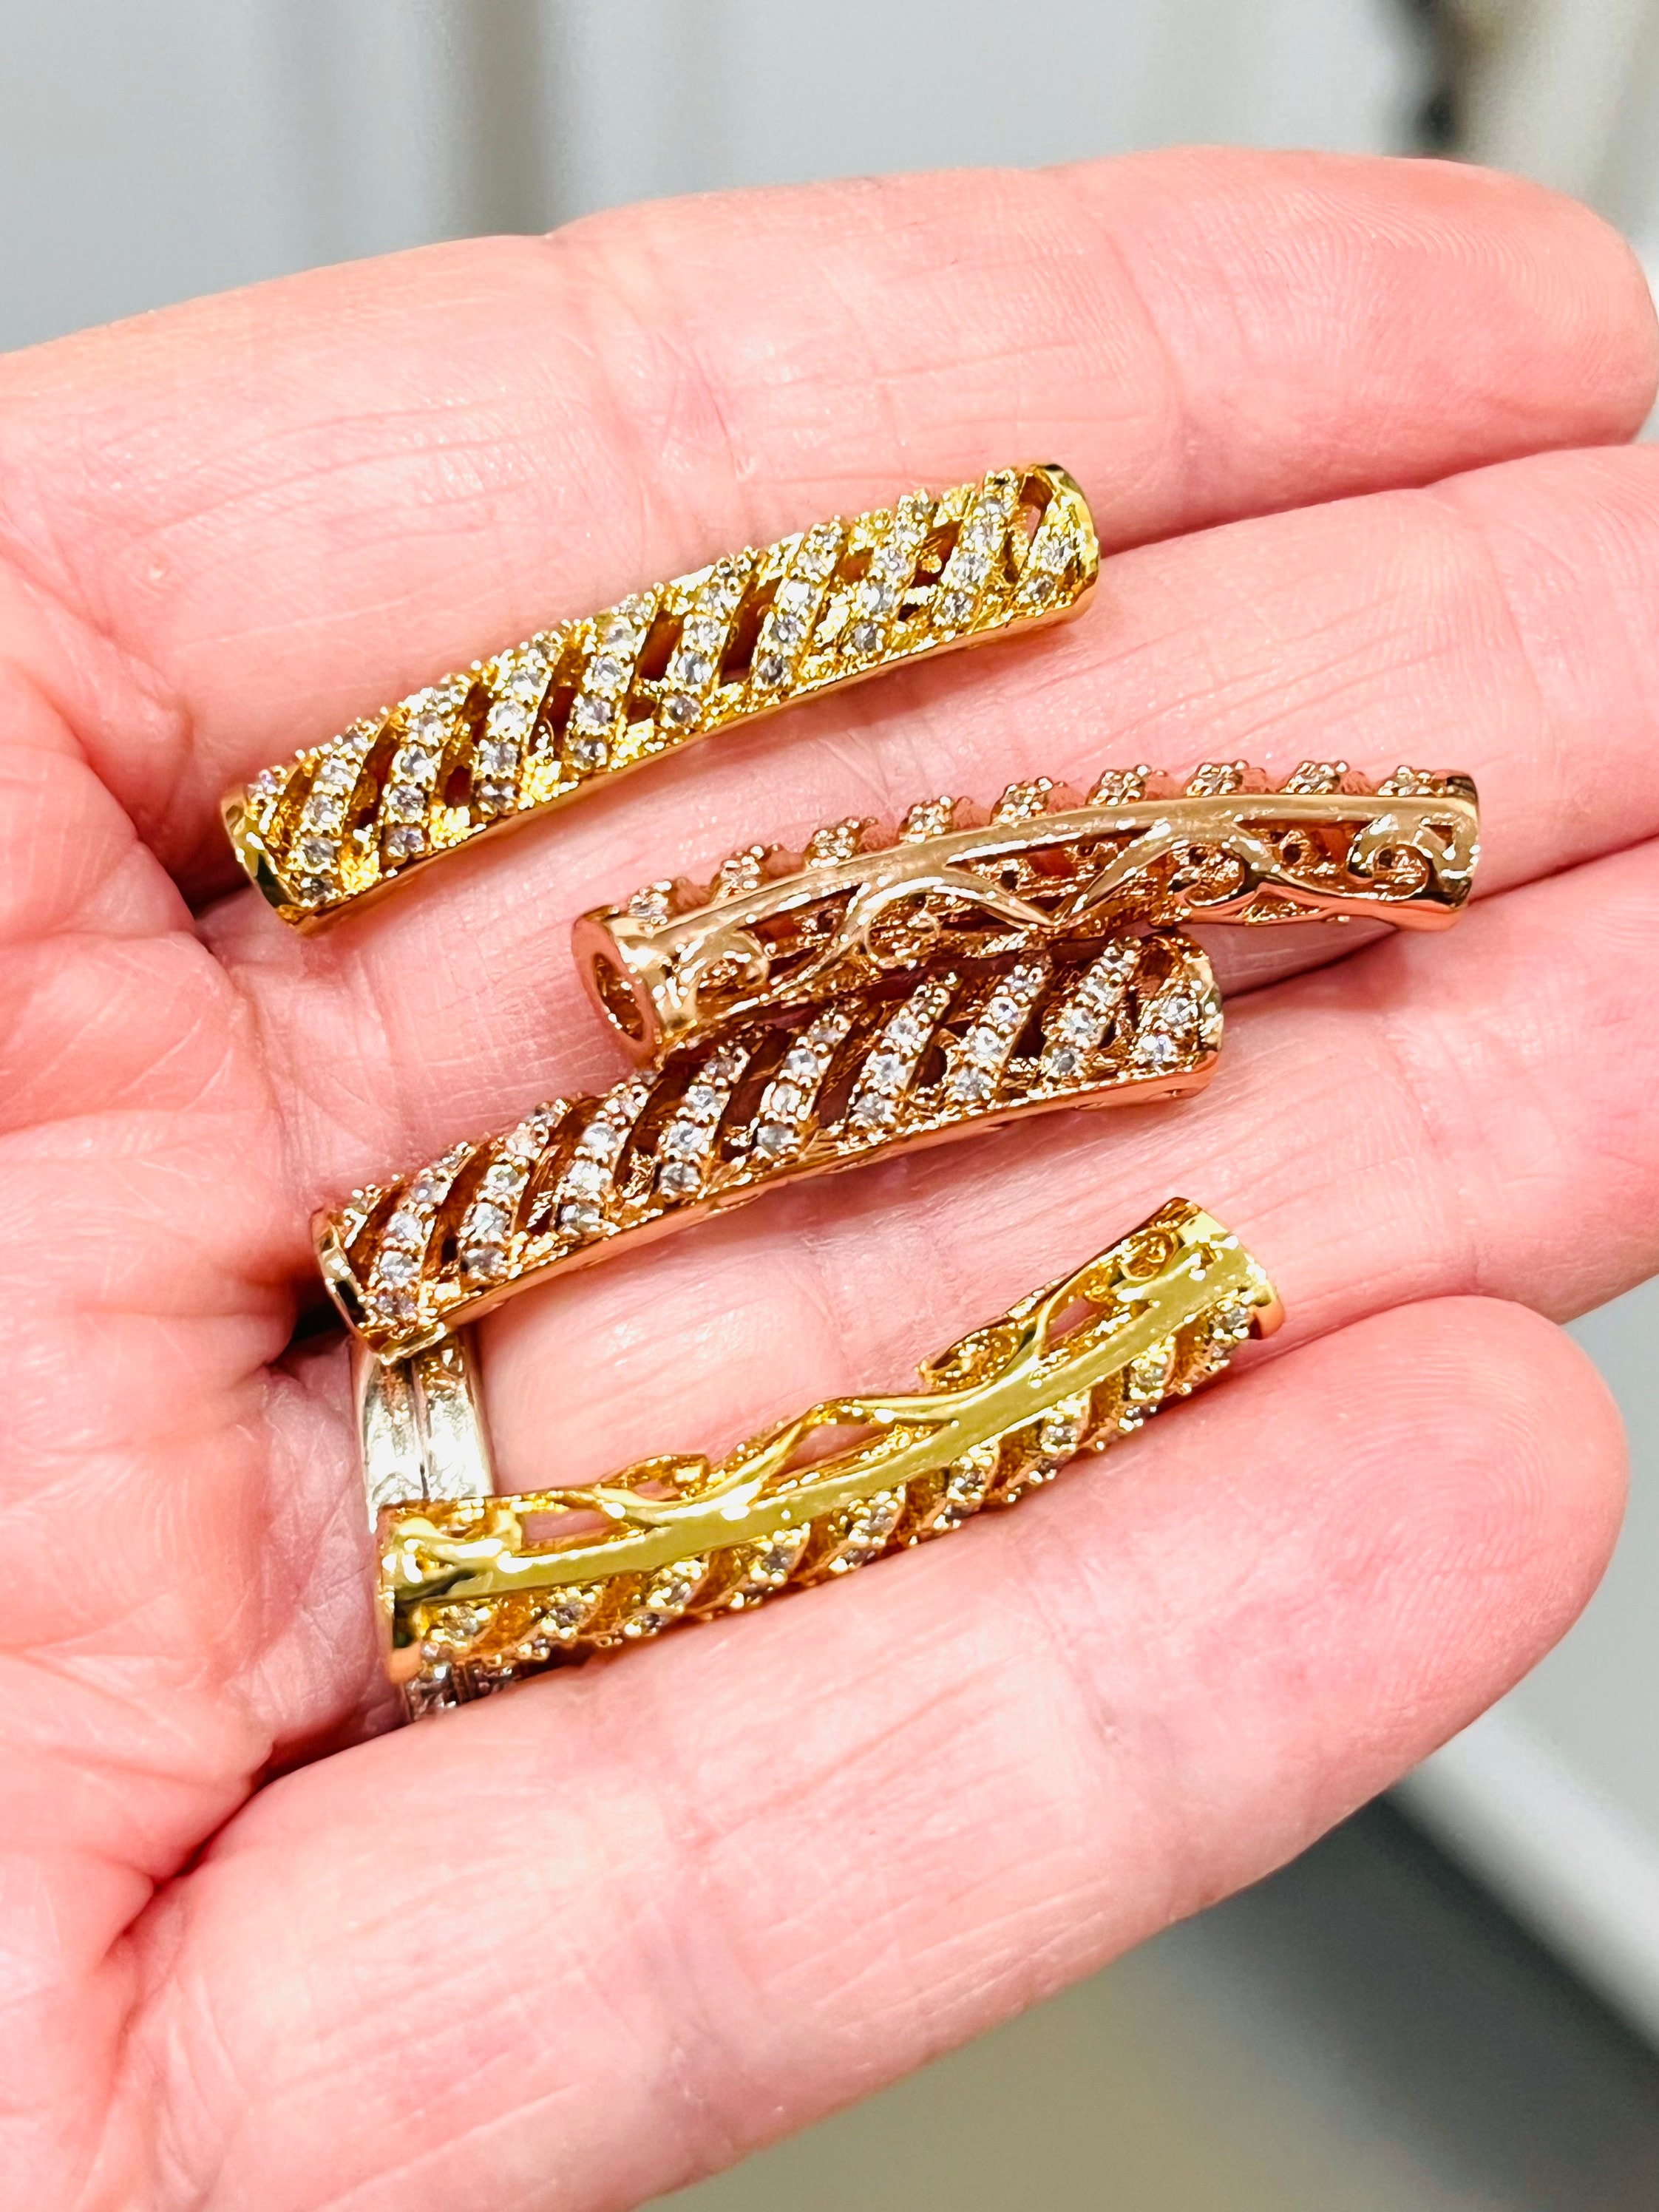 6mm, 8mm, 10mm Gold Plated Daisy Beads, Daisy Spacer Beads, Gold Jewelry  Beads, Bracelet Beads, Spacers, 25 Beads per Pack 